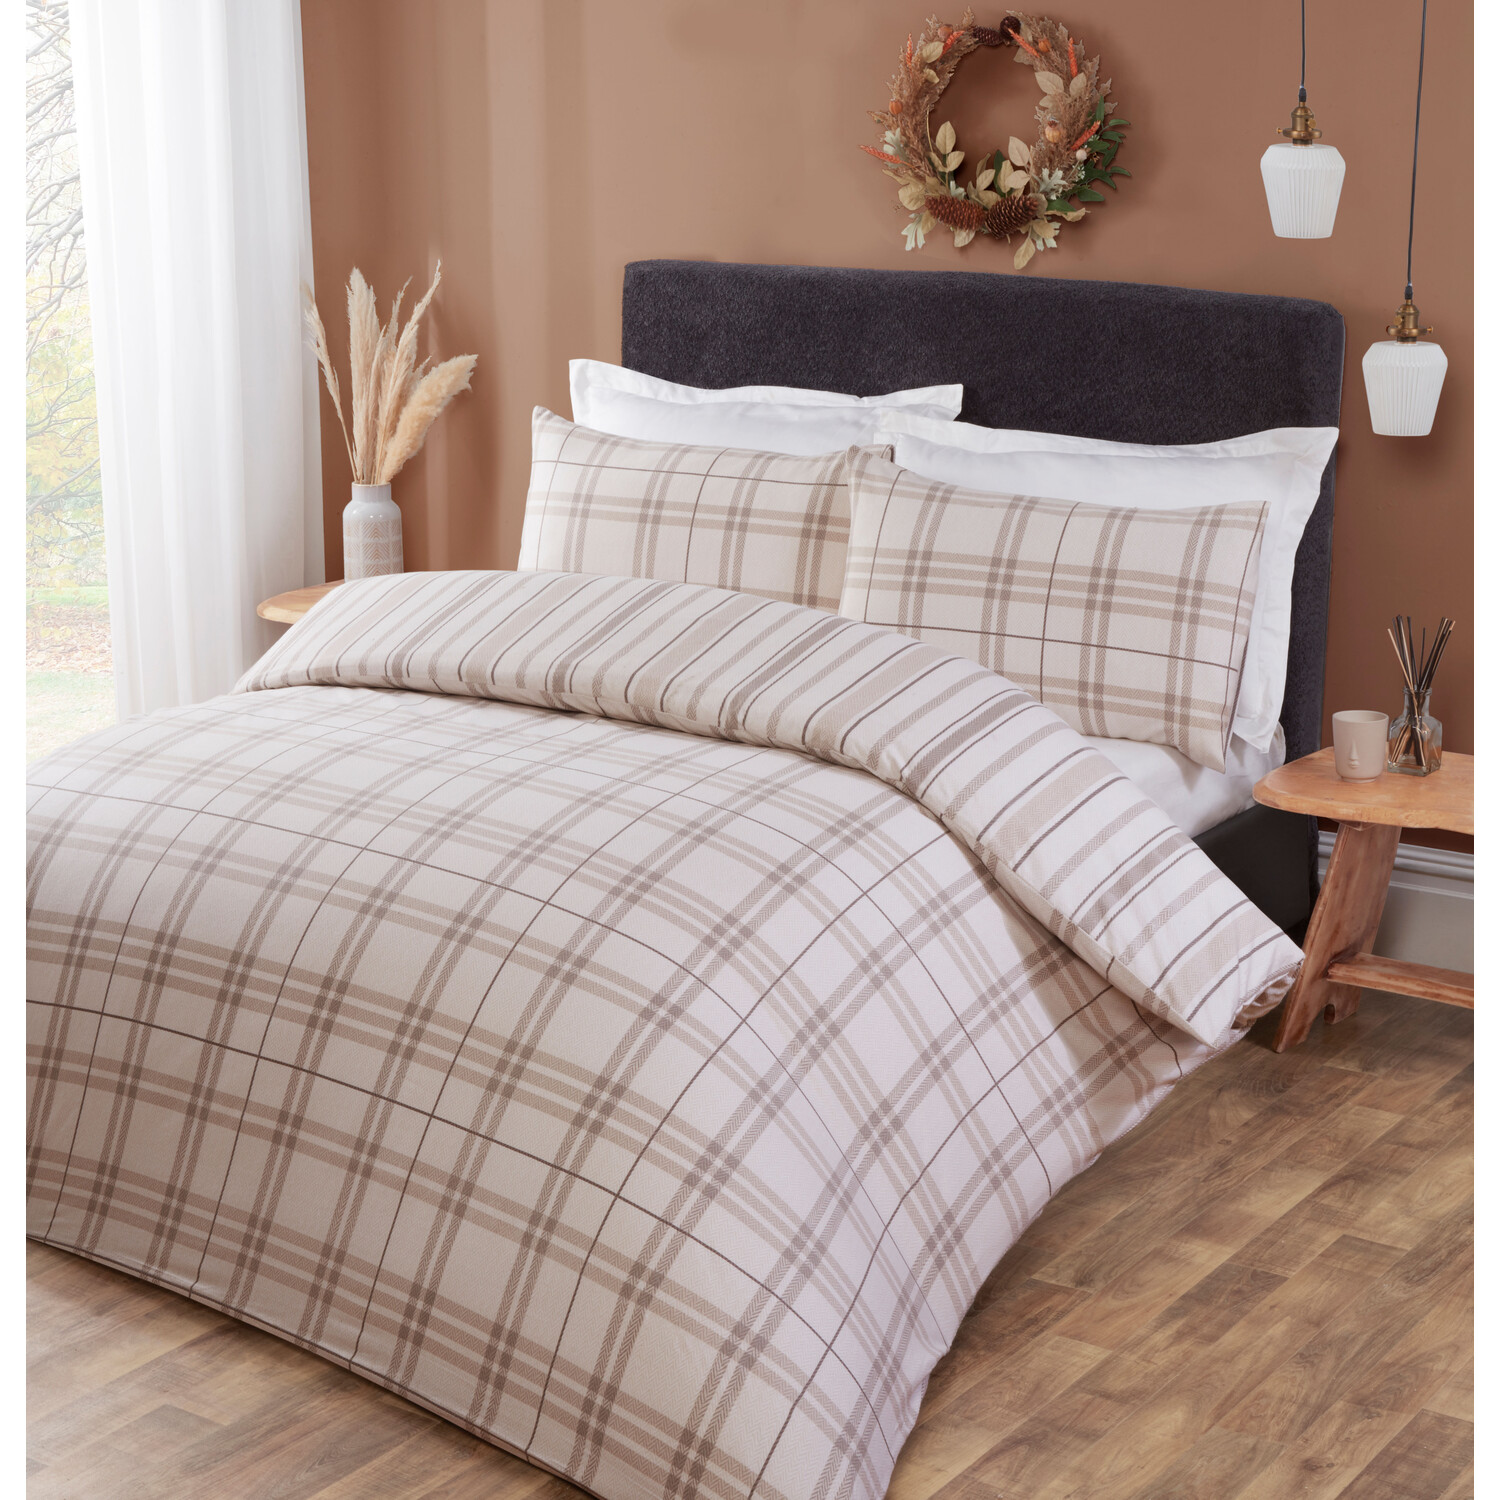 Fall Autumn Single Brown Check Duvet Cover and Pillowcase Set Image 2